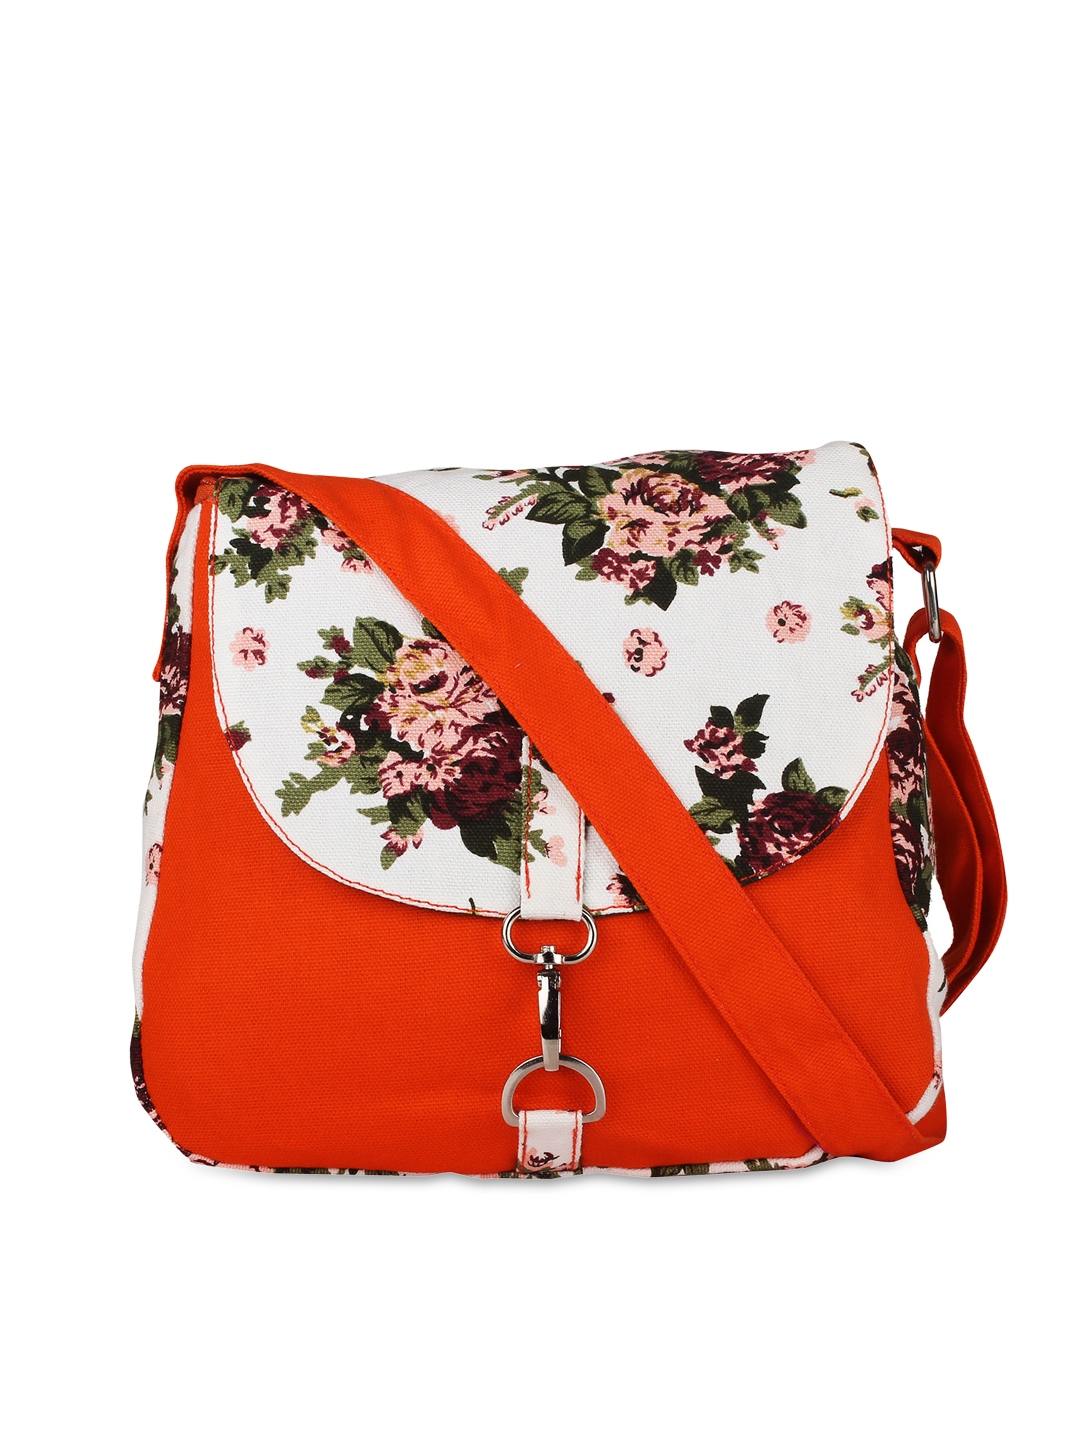 Sling Bags - Upto 50% to 80% OFF on Branded Side Purse/Sling Bags